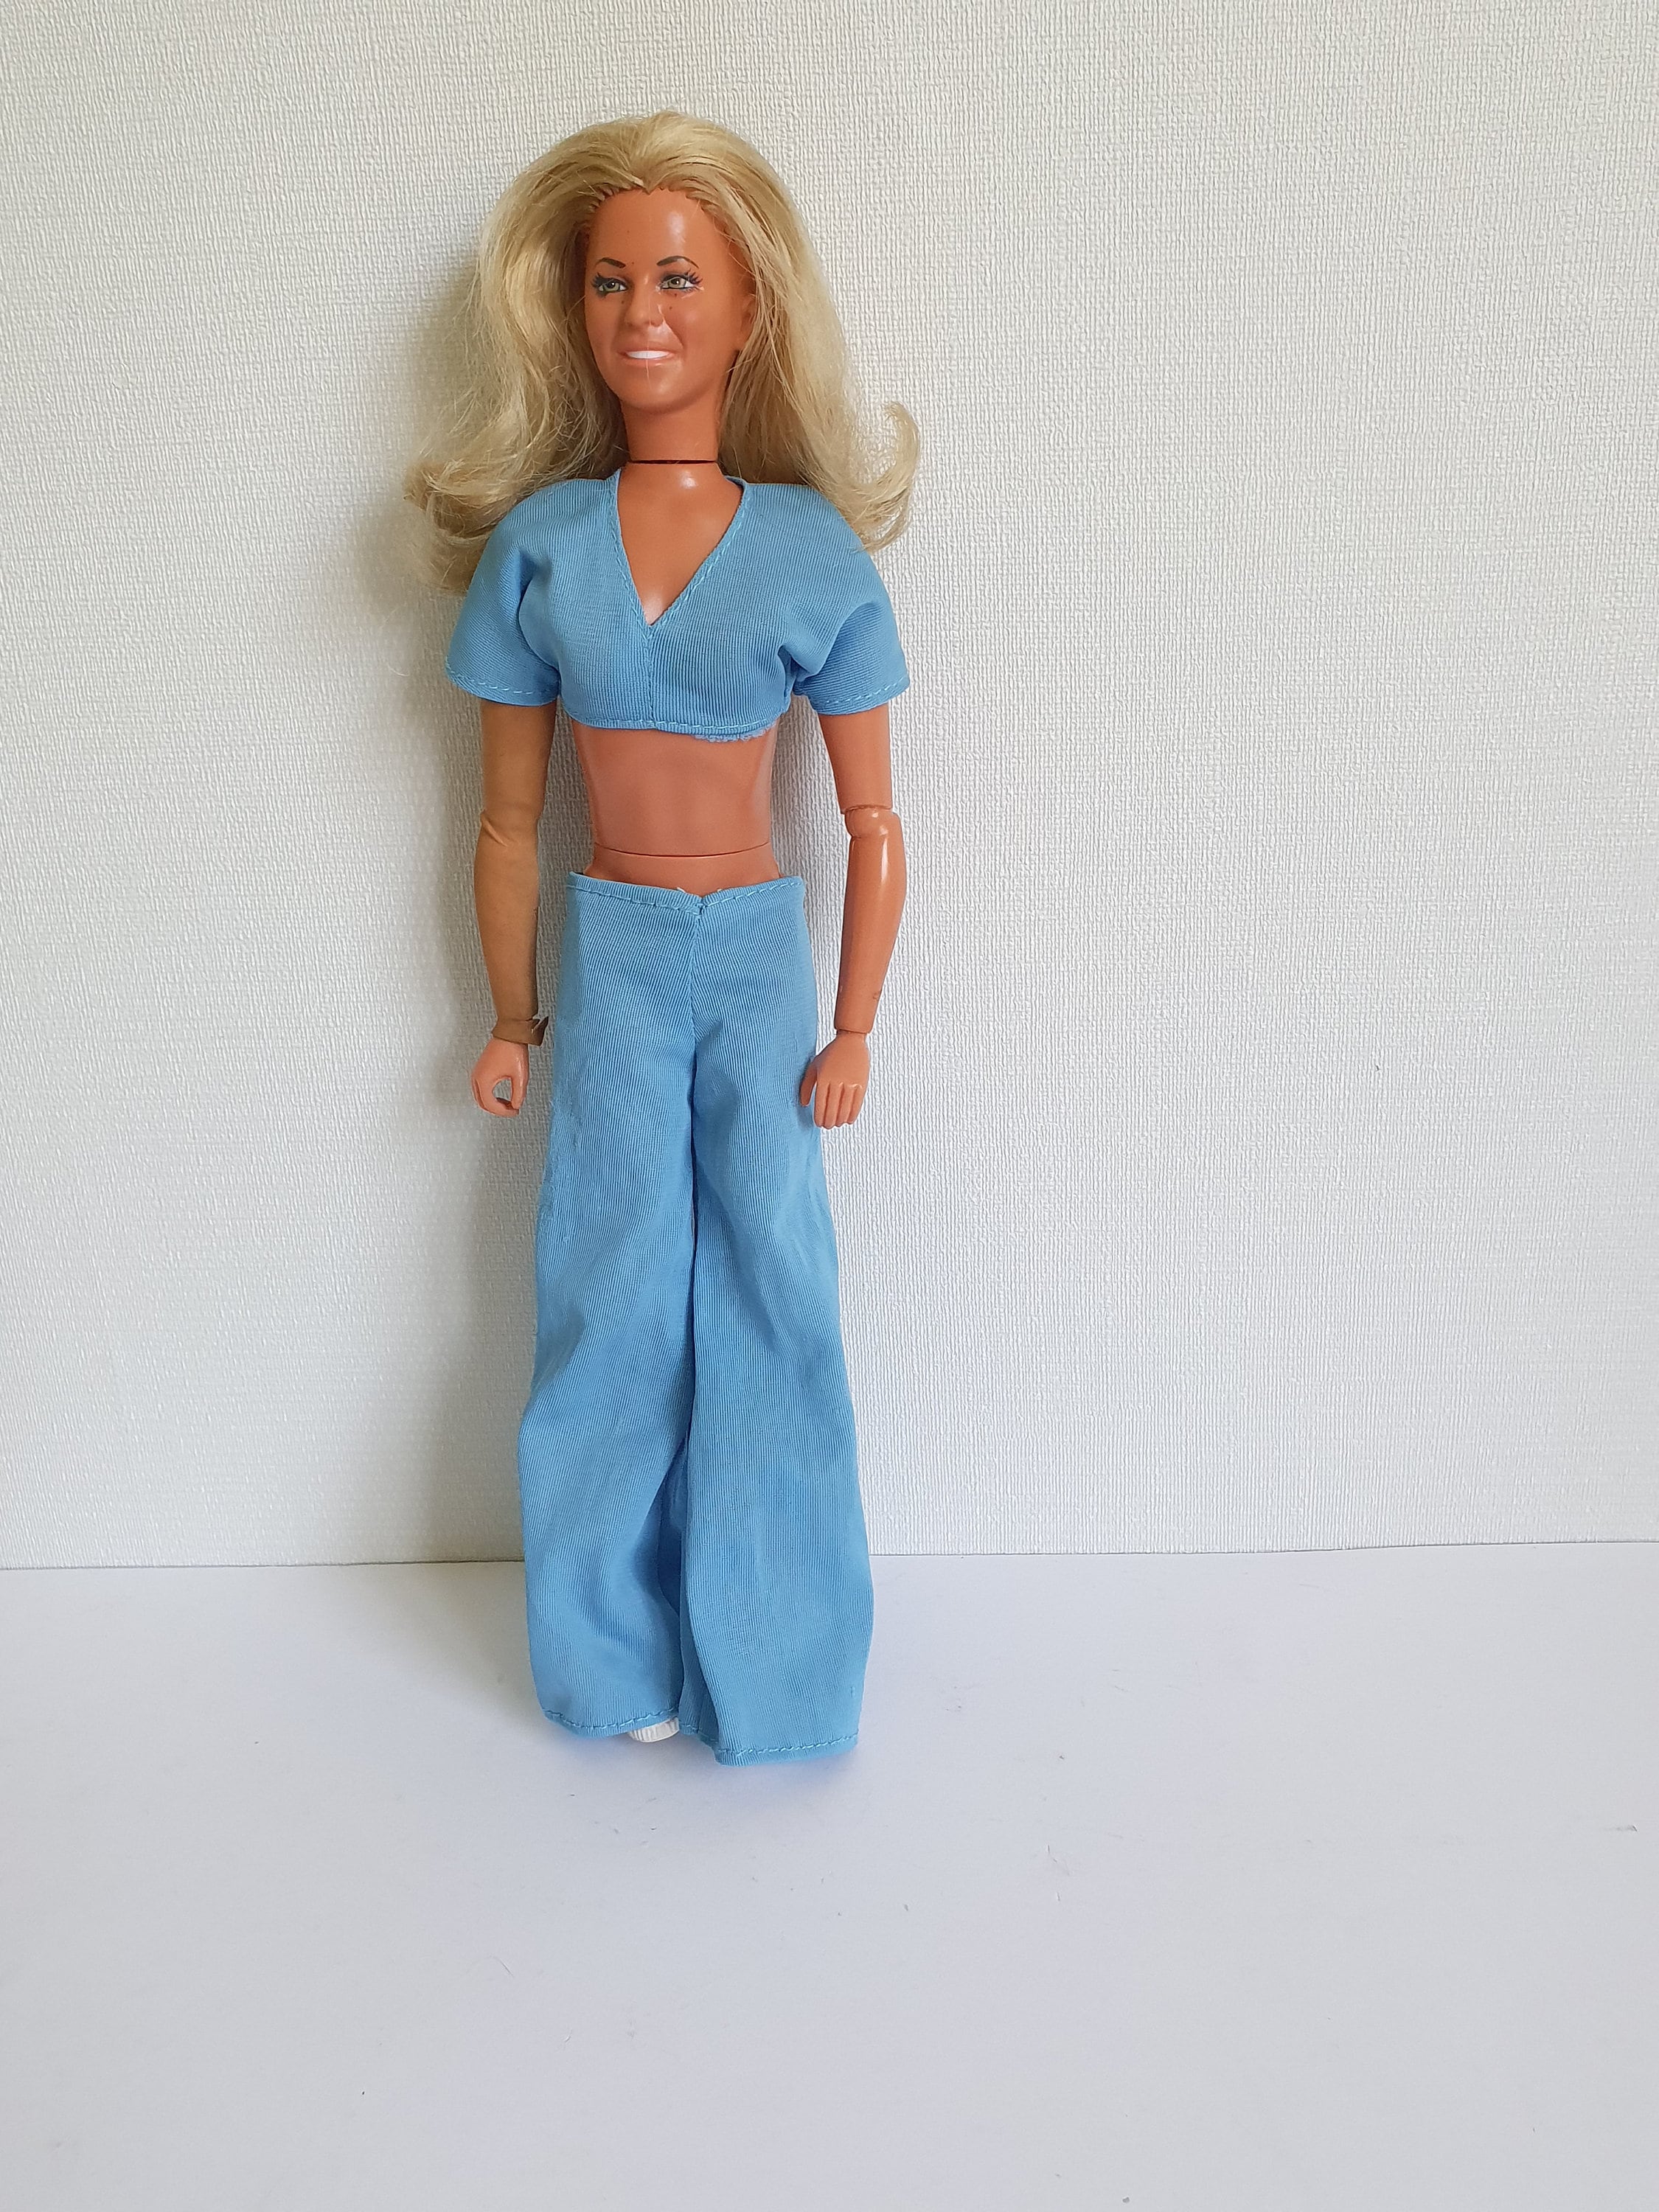 Vintage Kenner Jamie Sommers the Bionic Woman Doll W/ Blue